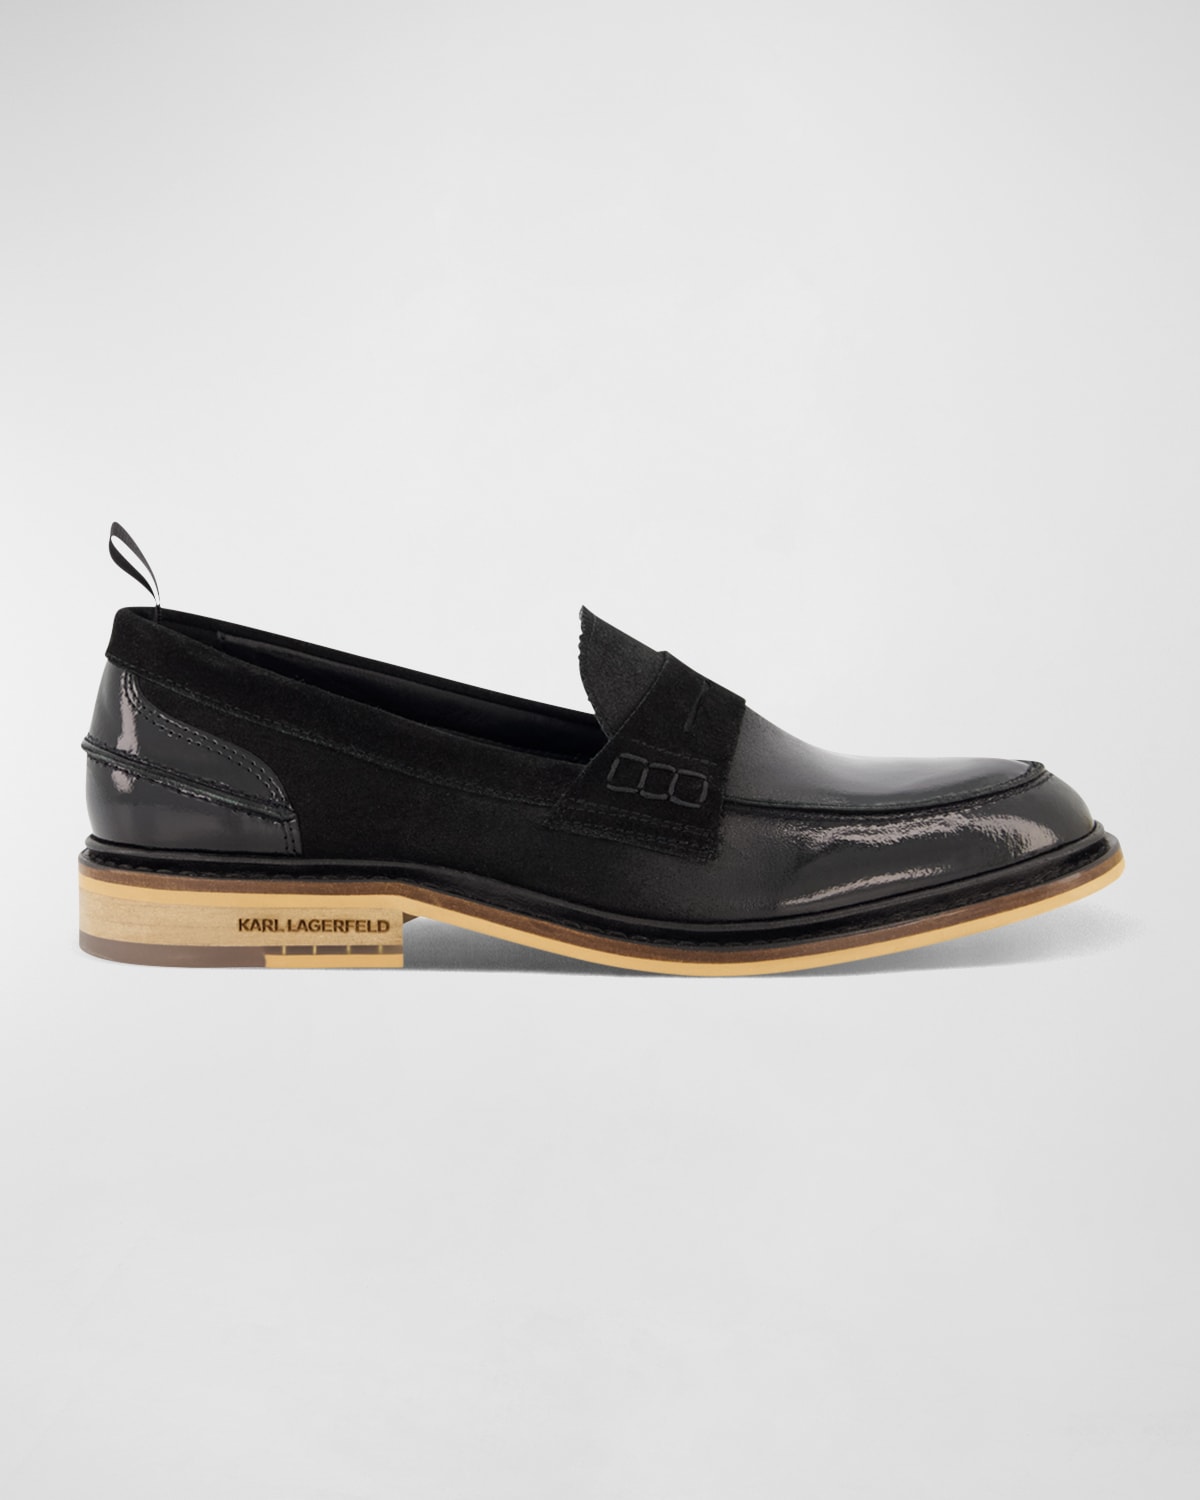 Men's Suede and Patent Leather Penny Loafers